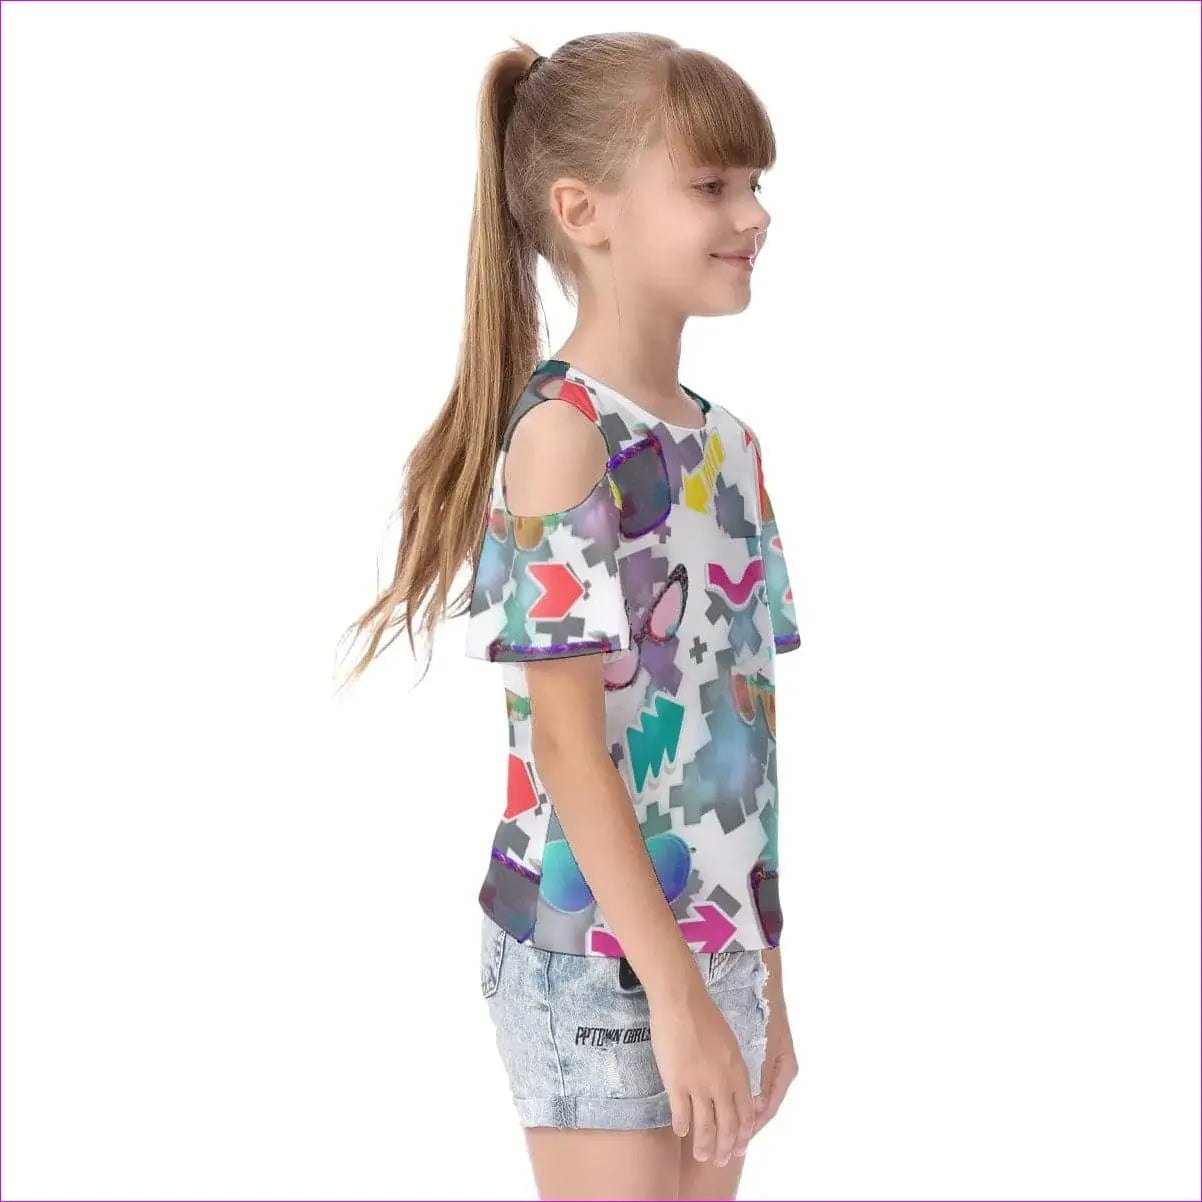 Shades Kids Cold Shoulder T-shirt With Ruffle Sleeves - kid's top at TFC&H Co.